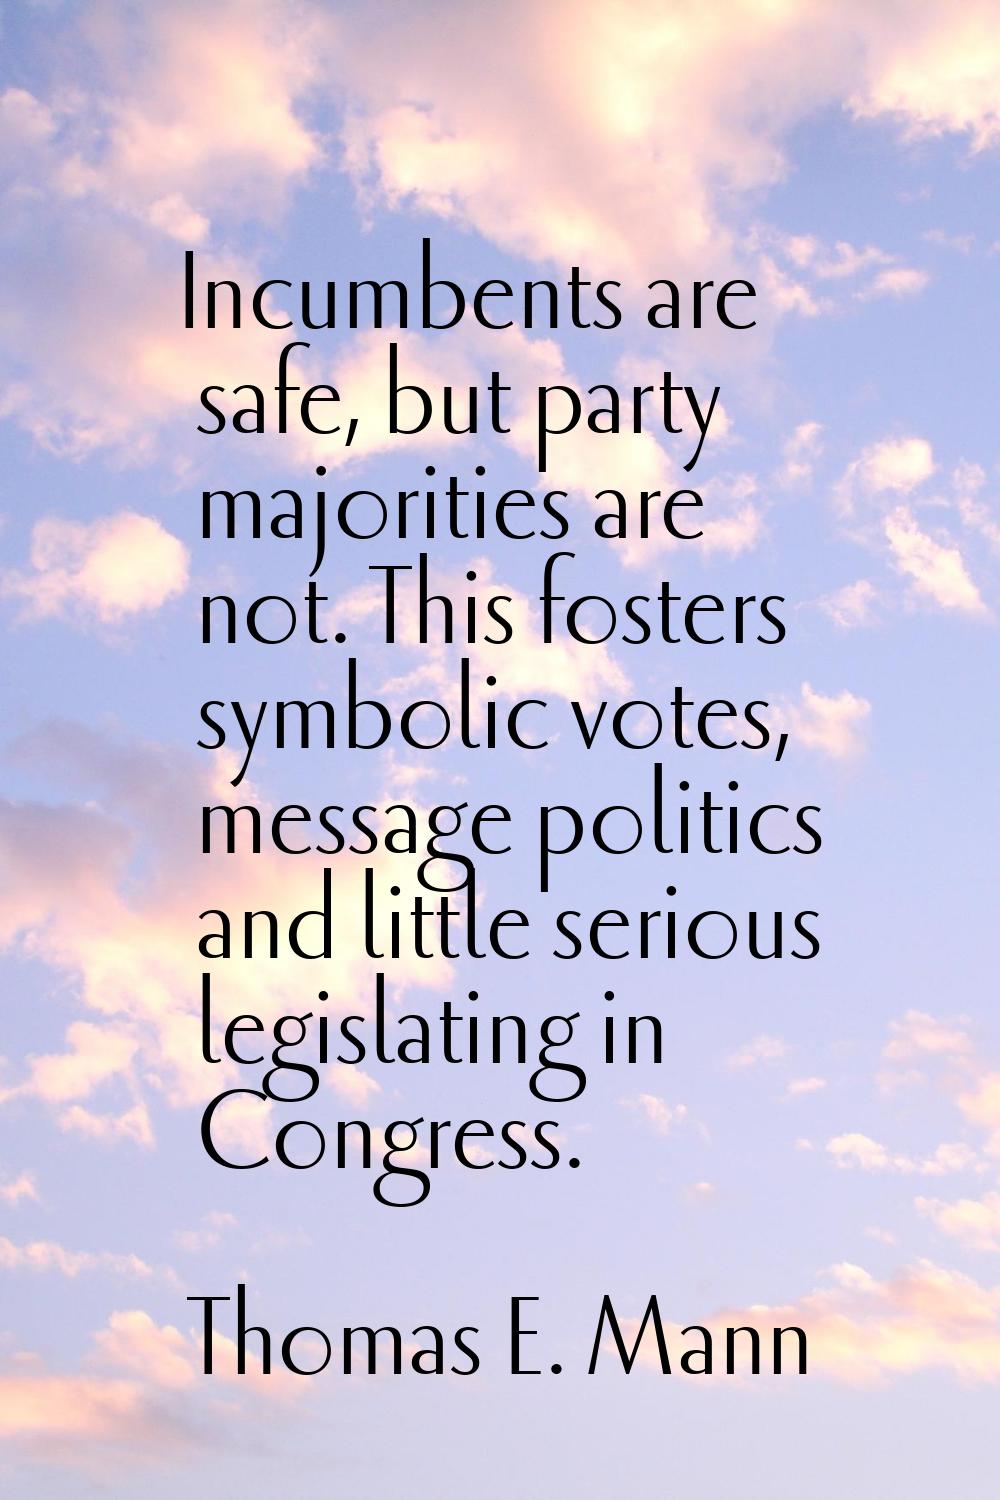 Incumbents are safe, but party majorities are not. This fosters symbolic votes, message politics an